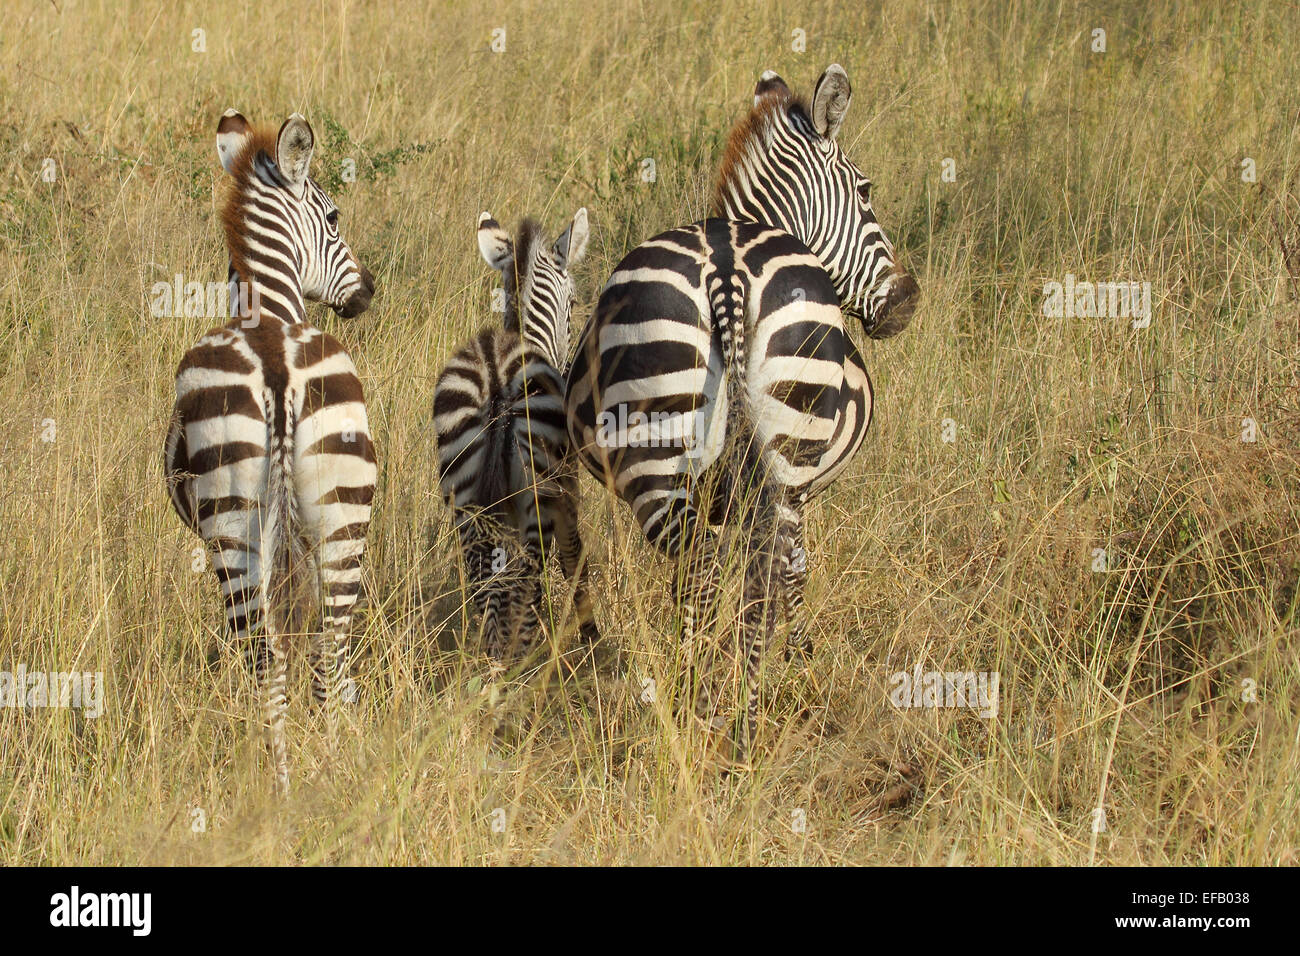 A group of three young common zebras, Equus Quagga, from behind in Serengeti National Park, Tanzania Stock Photo